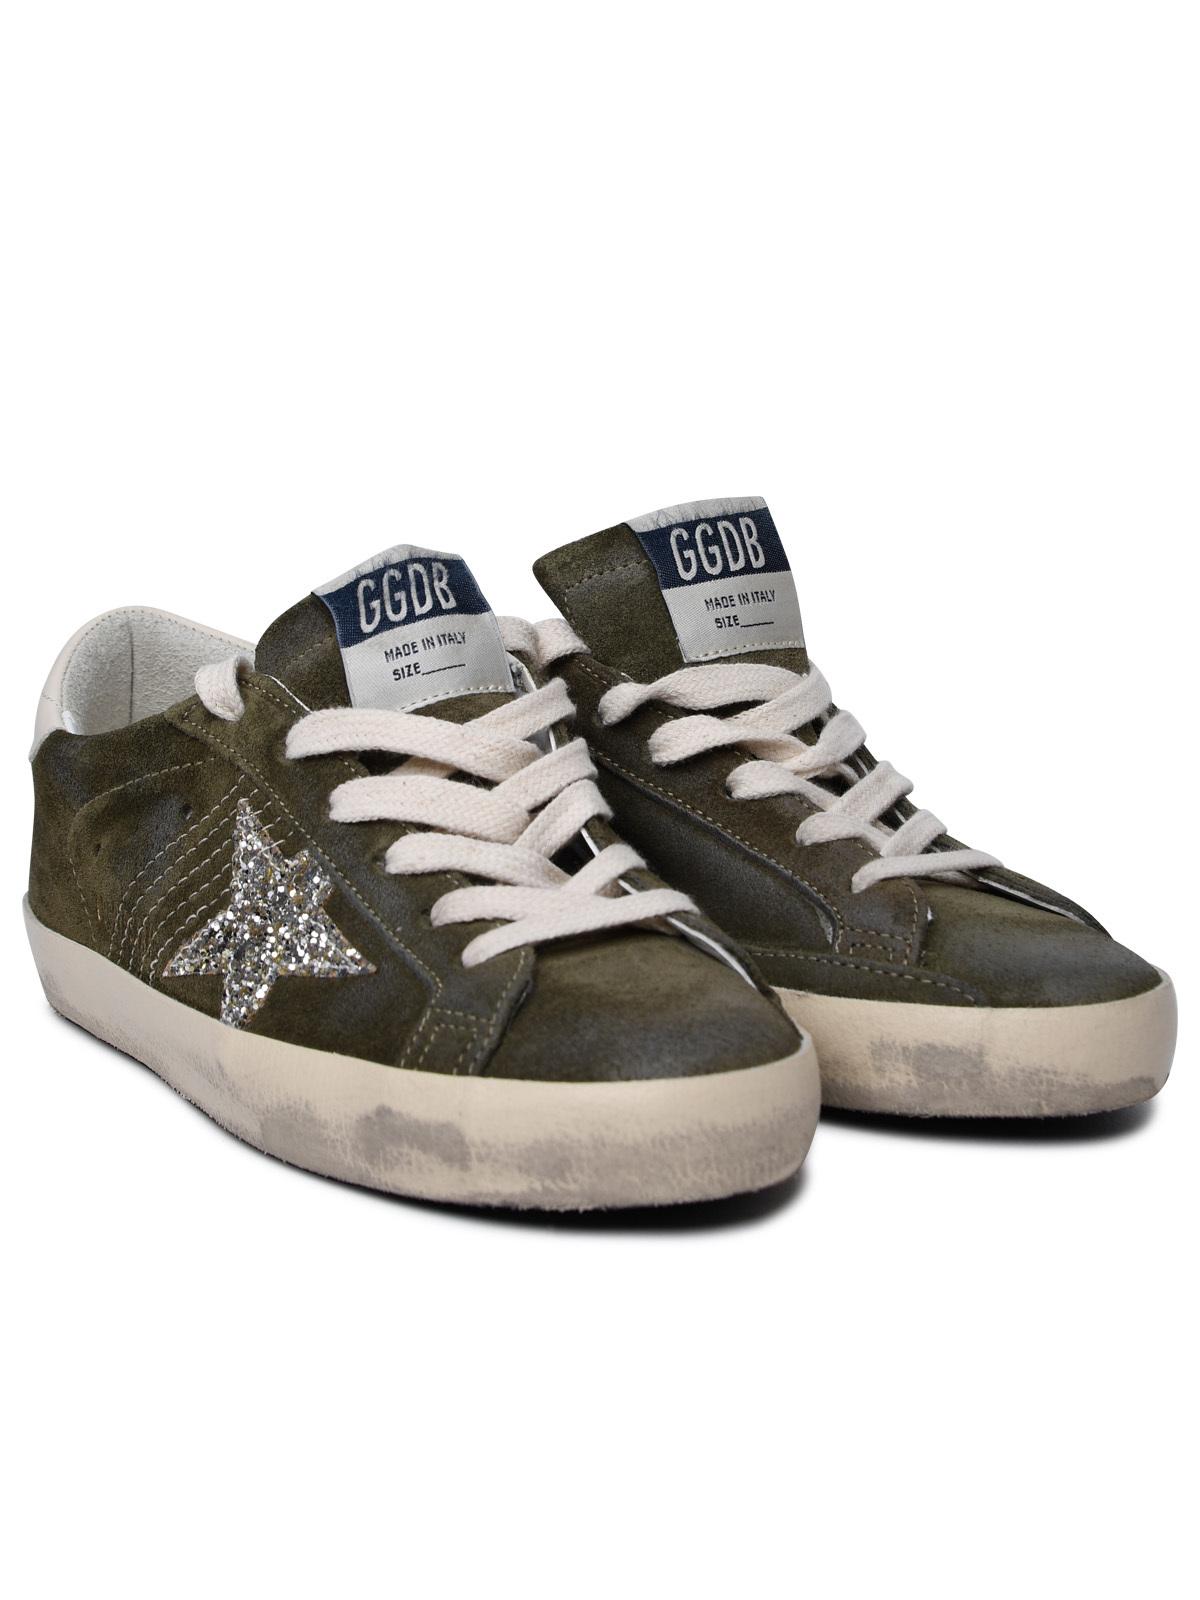 Golden Goose Woman Golden Goose 'Super-Star Classic' Green Leather Sneakers